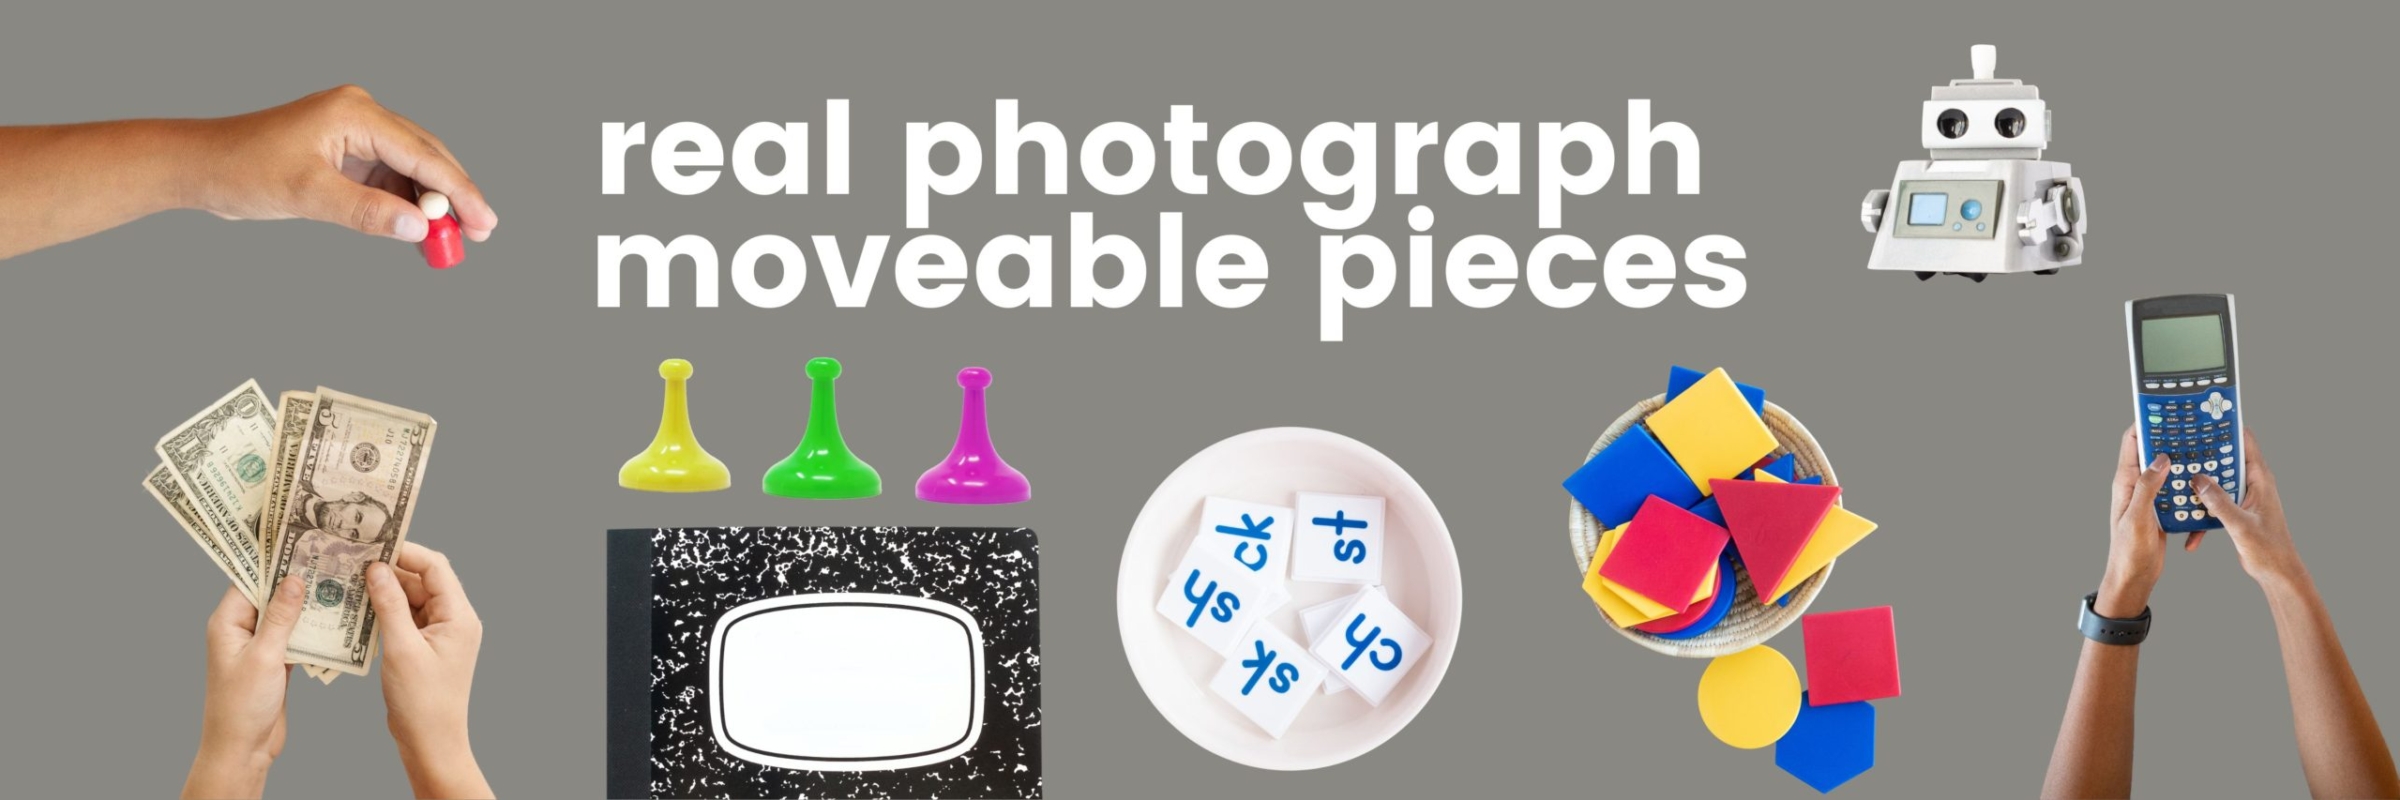 Real Photograph Moveable Pieces in the Image Maker Membership